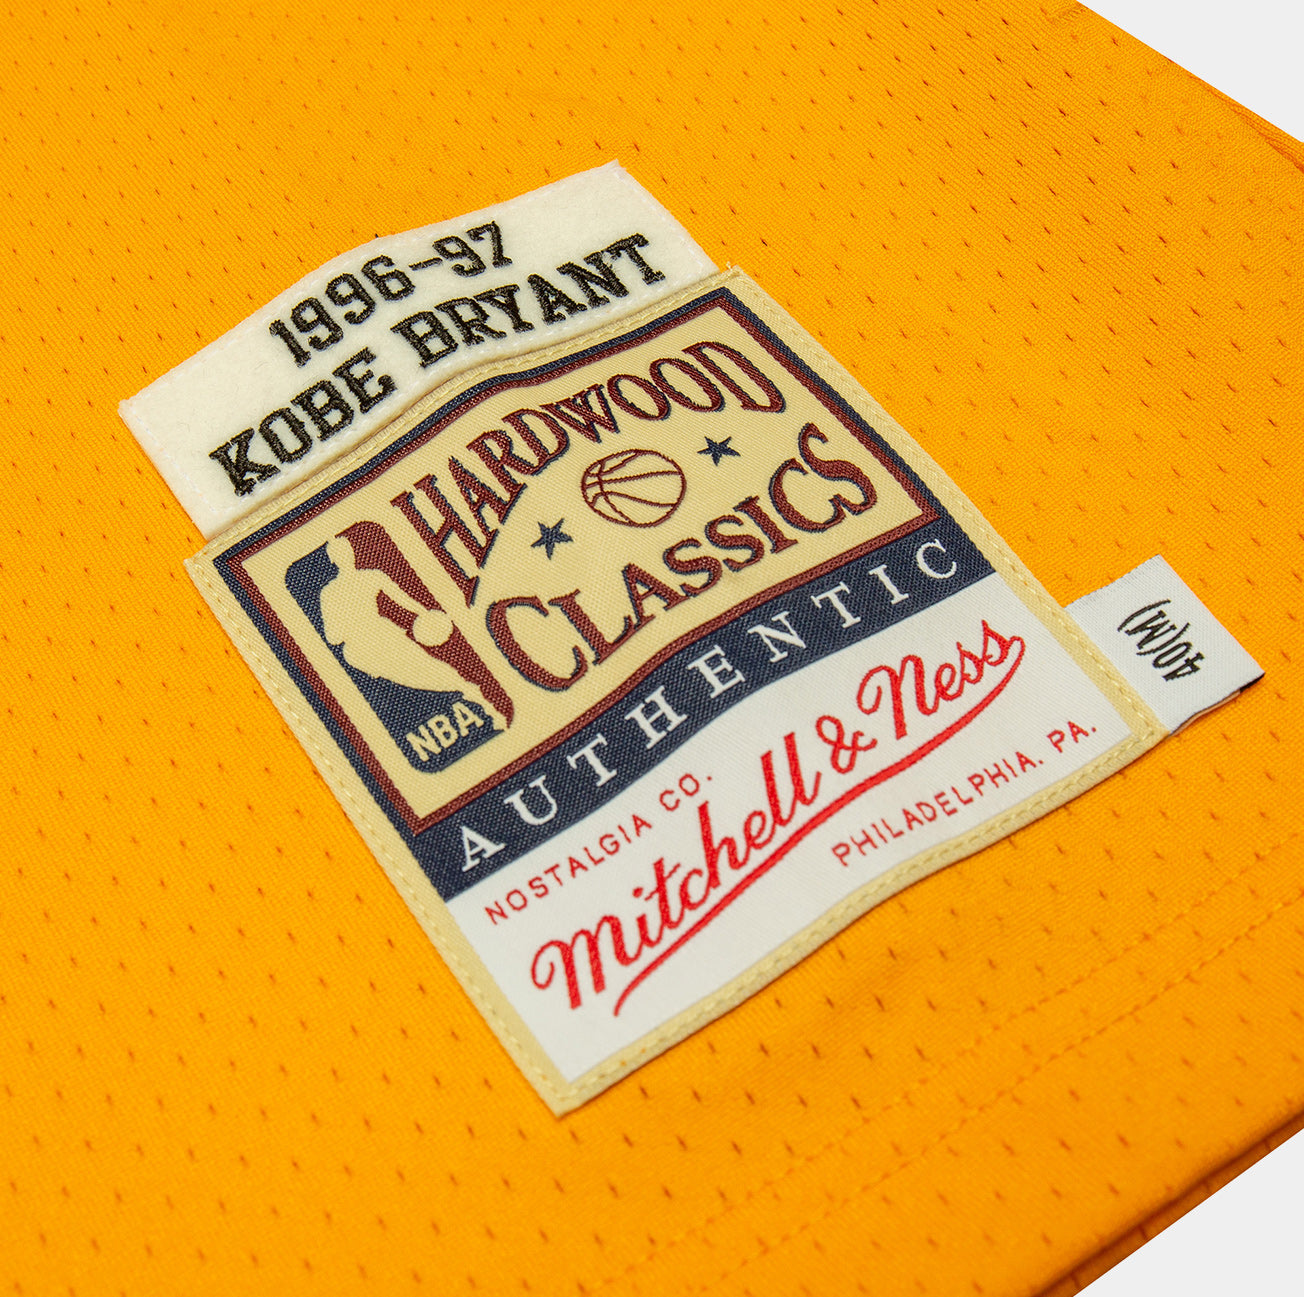 Mitchell And Ness Men NBA Los Angeles Lakers Home 1996-97 Kobe